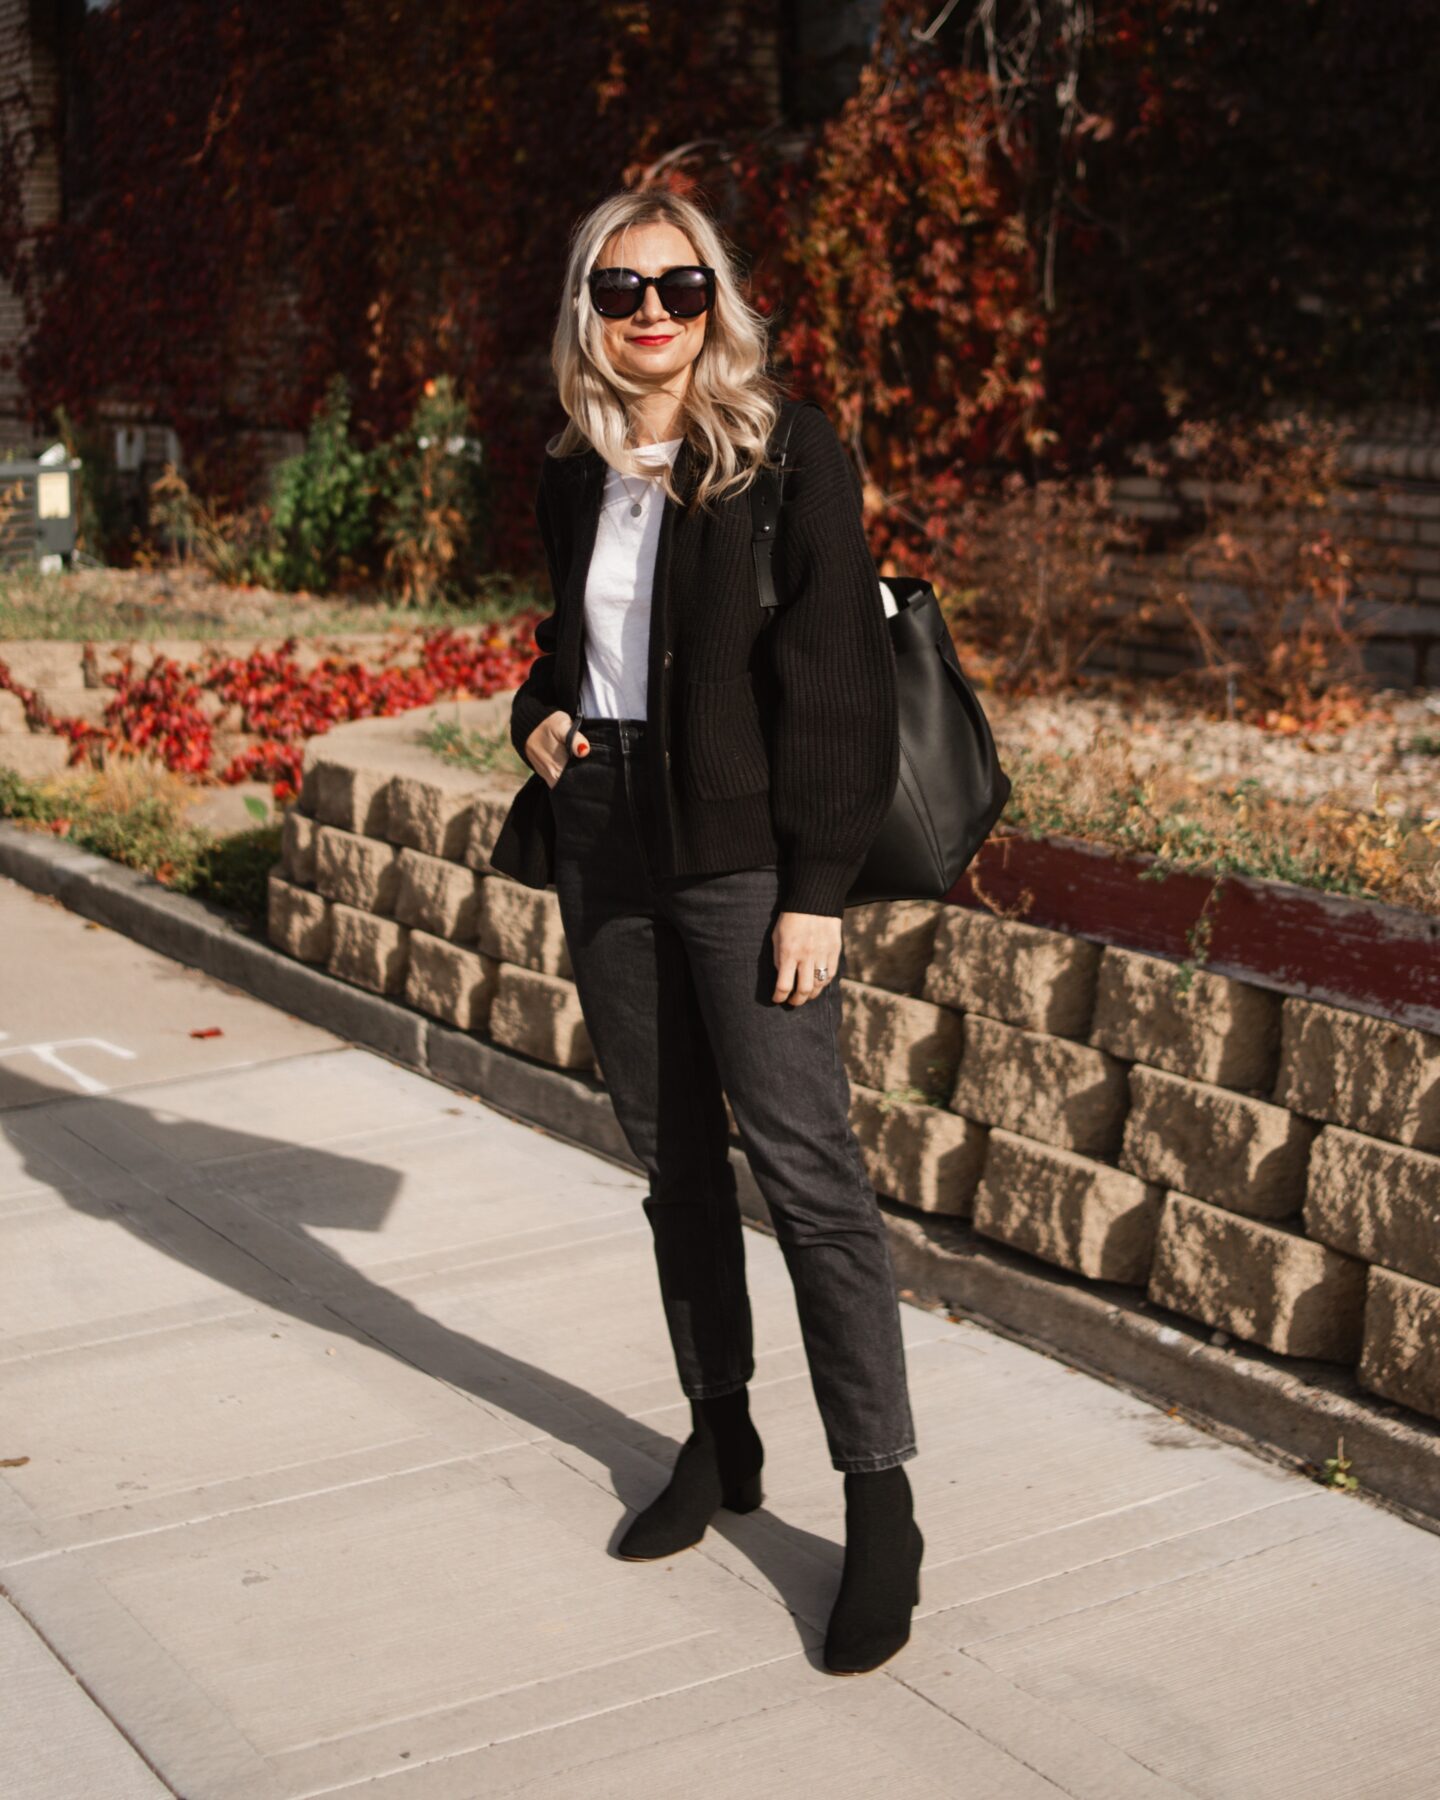 Karin Emily wears a casual holiday outfit with a black cardigan, white tee, black jeans, black boots, and a black bag all with new pieces from Everlane